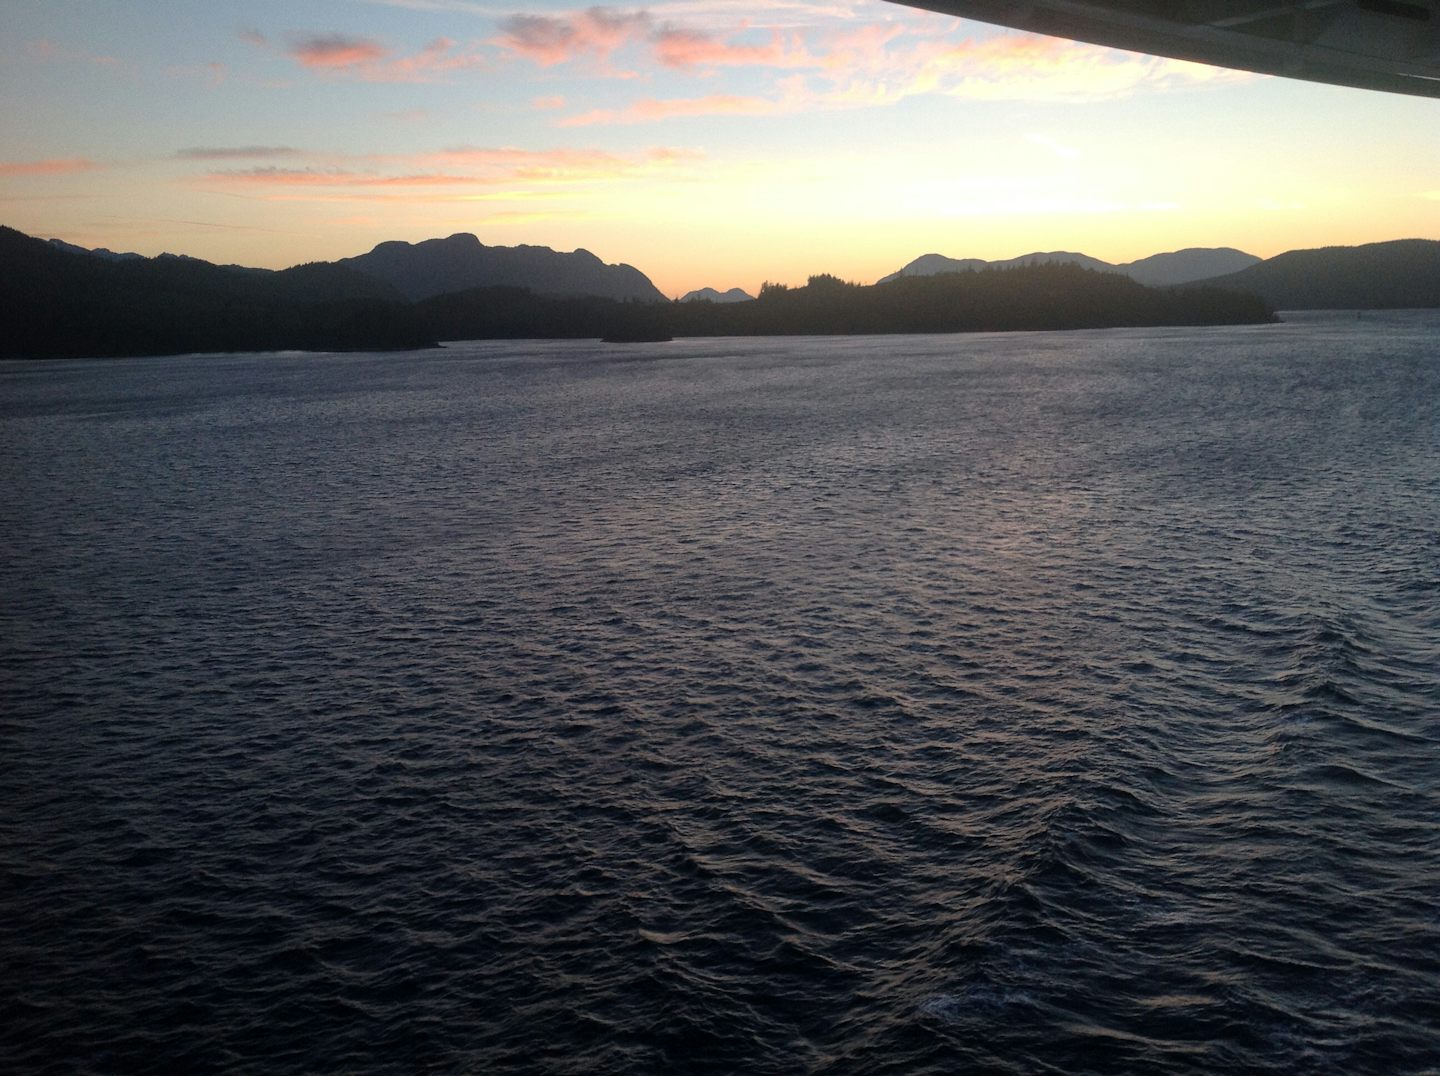 Sunset as we transited the straits to Vancouver